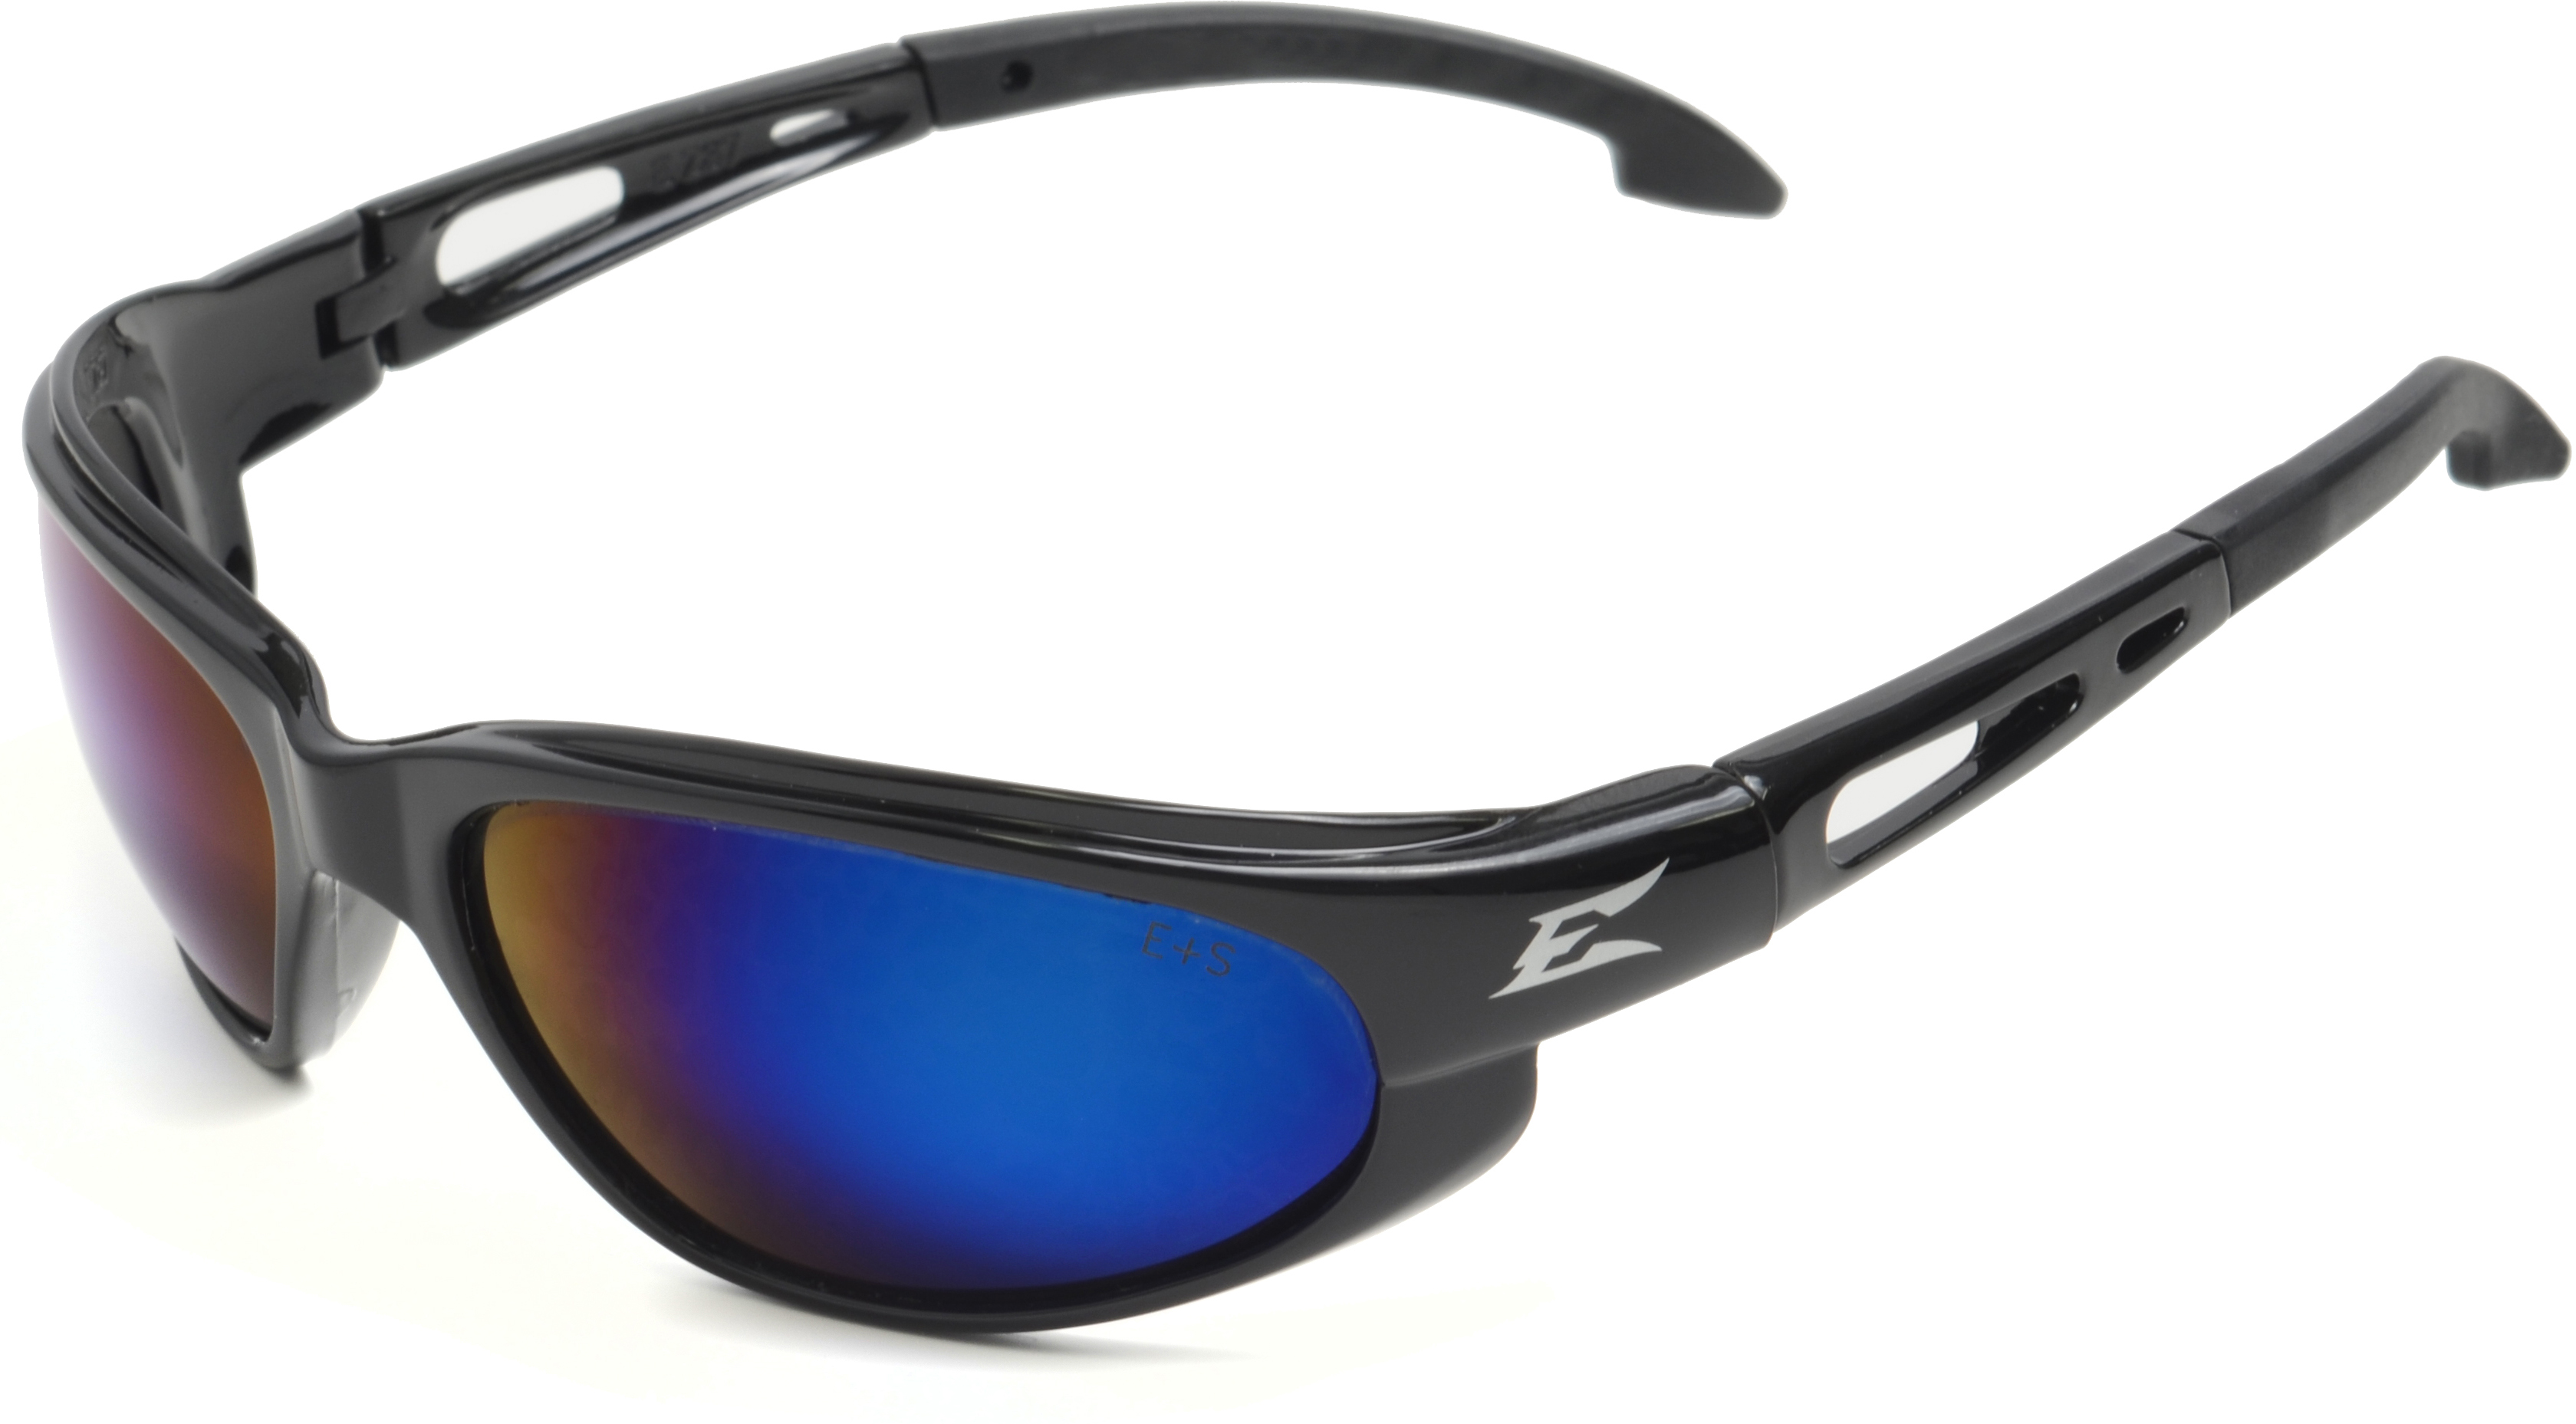 Edge Safety Eyewear Dakura Safety Glasses  Up to 16% Off 4.7 Star Rating  Free Shipping over $49!